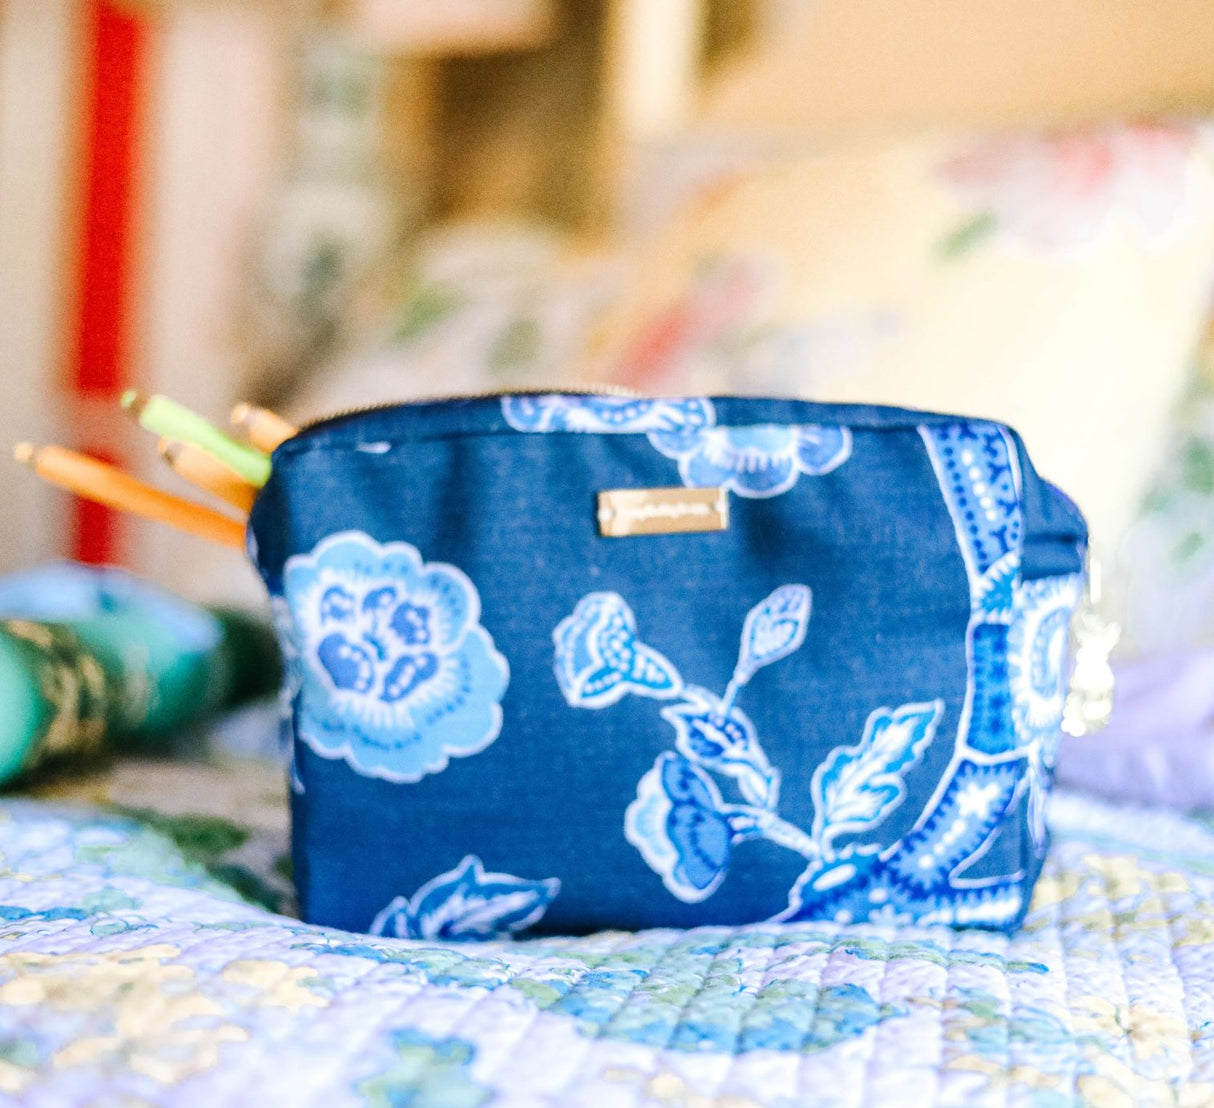 Large Cosmetics and Toiletries Bag/Temple Garden Navy